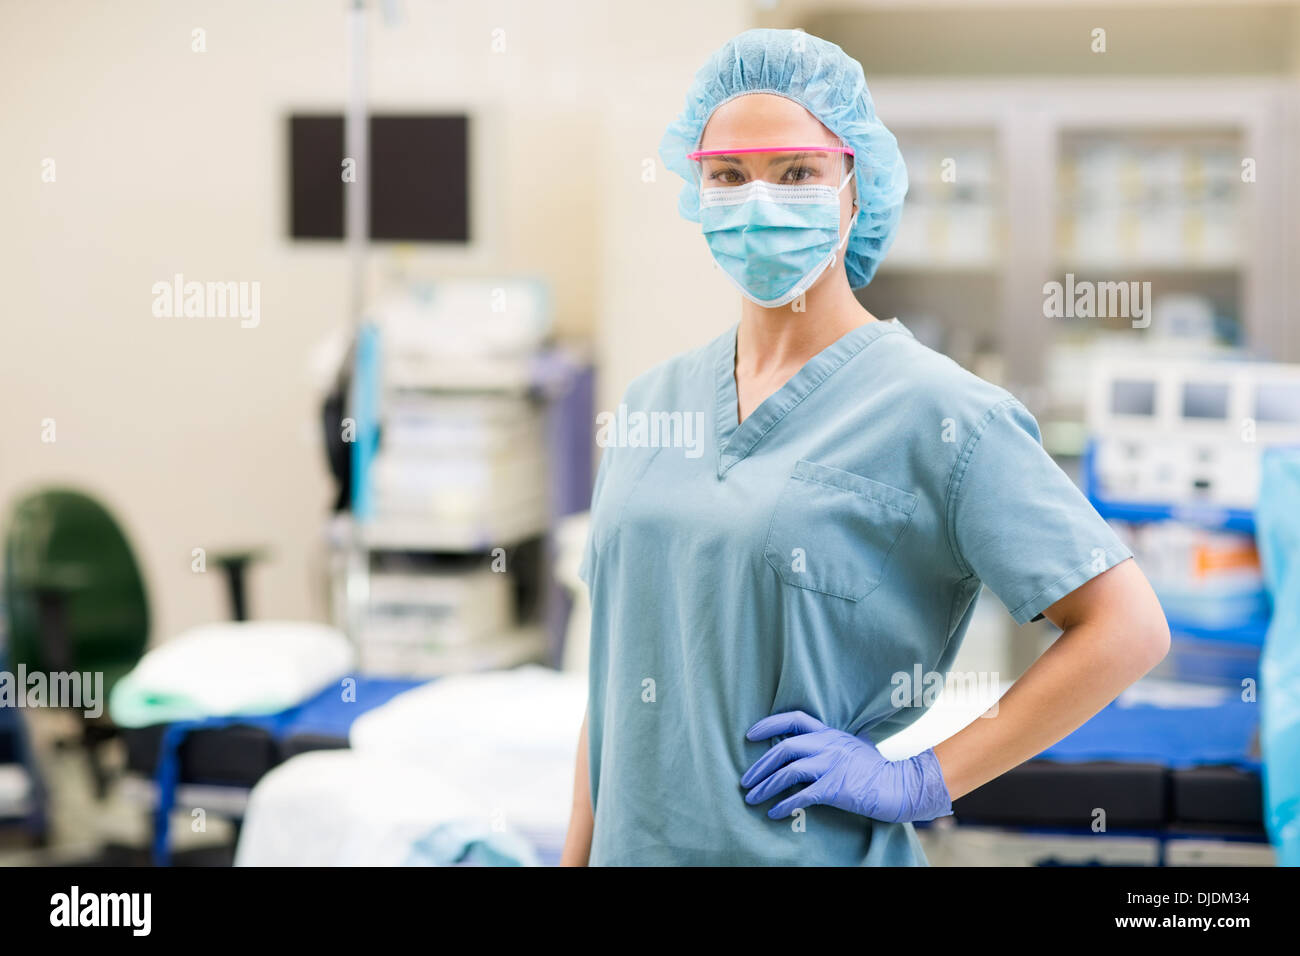 Portrait of Surgical Team Member Stock Photo